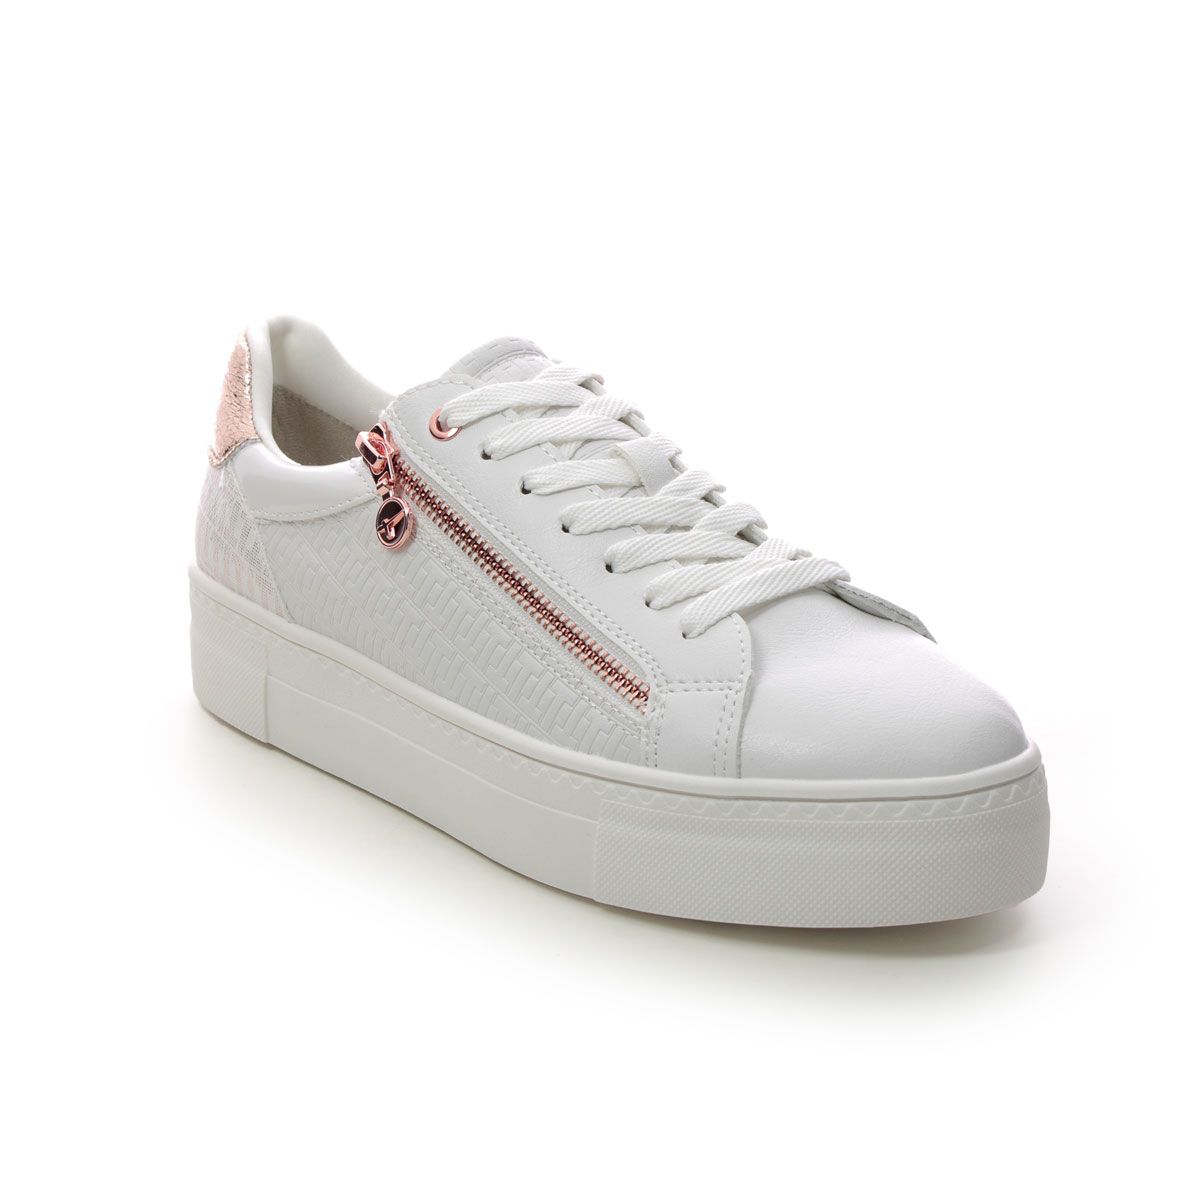 Tamaris Lima Zip White Rose Gold Womens Trainers 23313-20-196 In Size 38 In Plain White Rose Gold